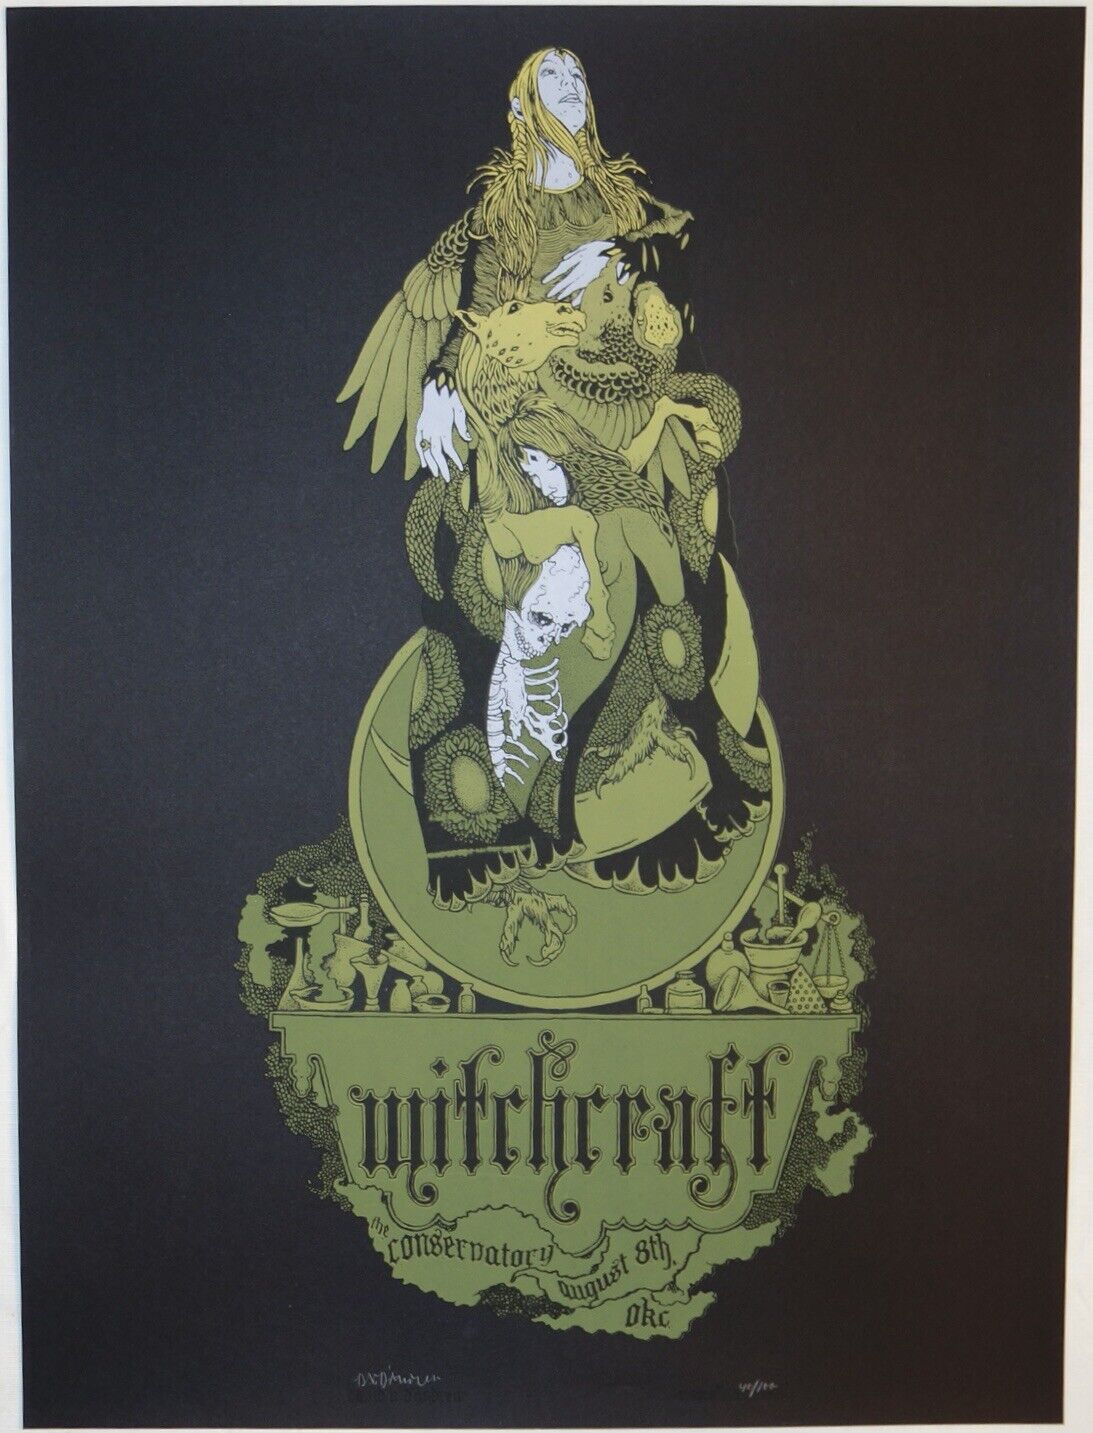 2008 Witchcraft - Oklahoma City Silkscreen Concert Poster S/n By David D'andrea